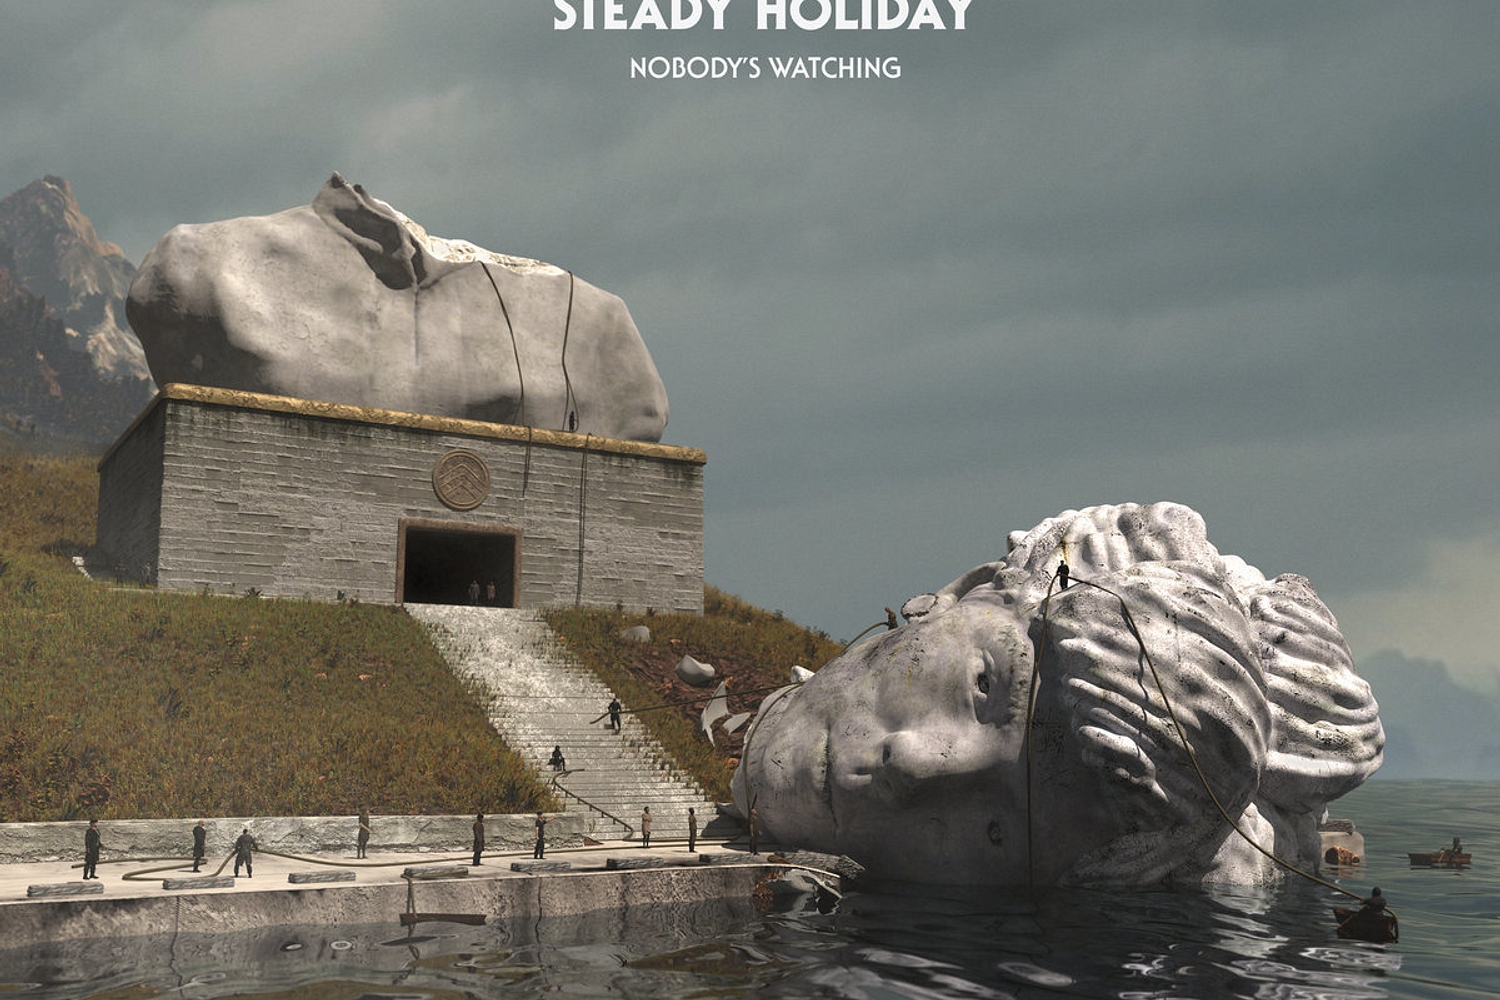 Steady Holiday - Nobody’s Watching